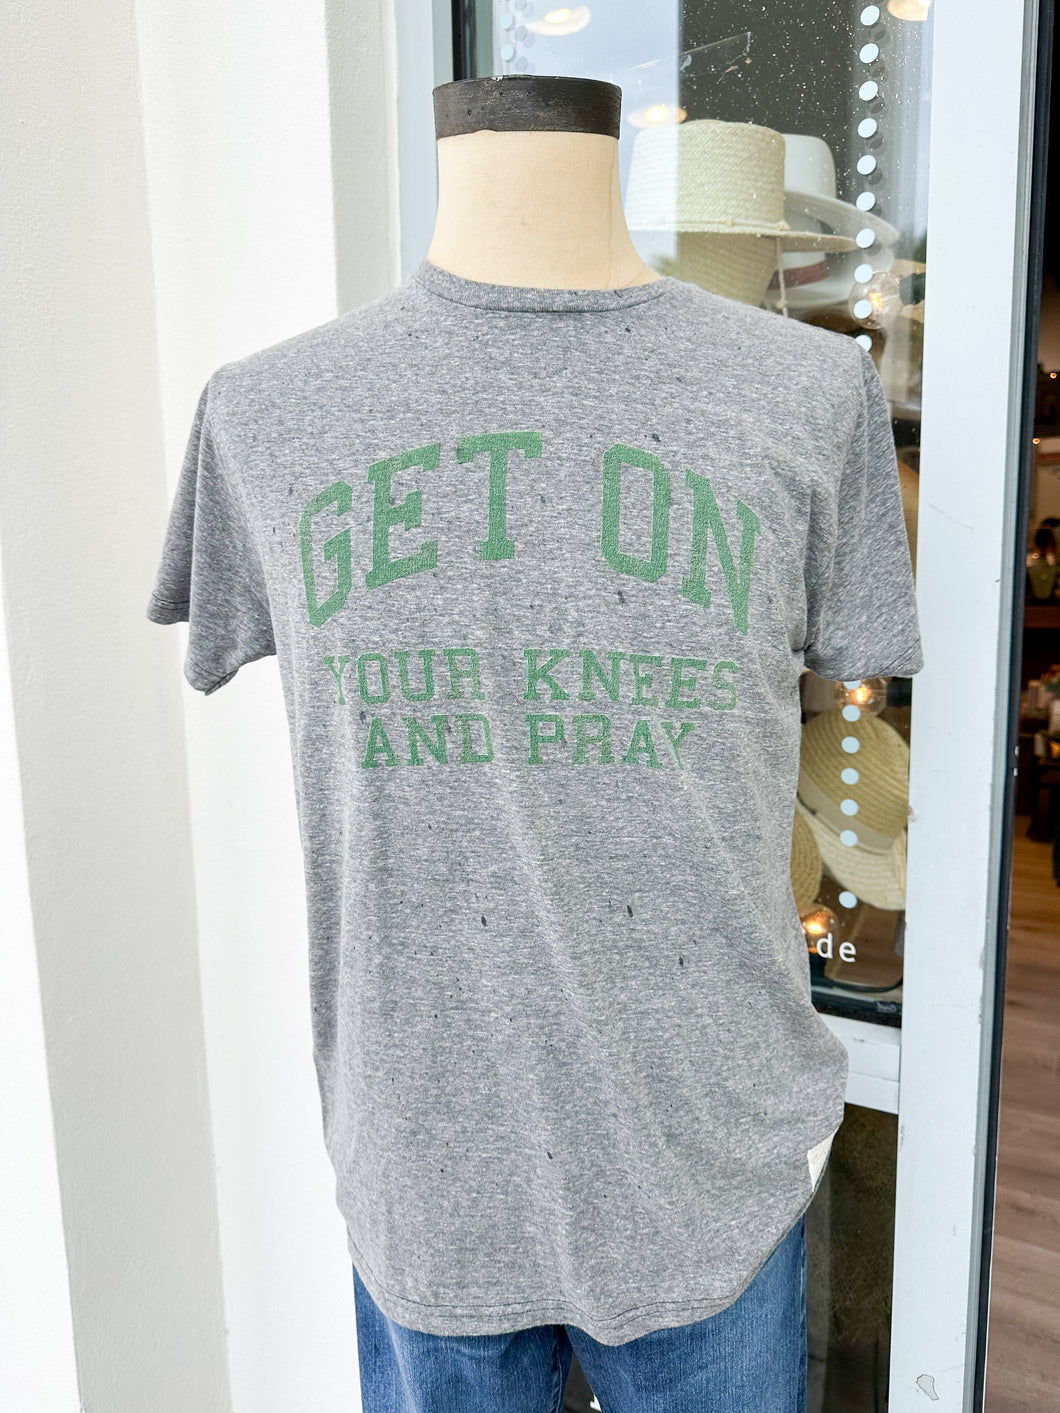 Get On Your Knees And Pray Tee - Grey